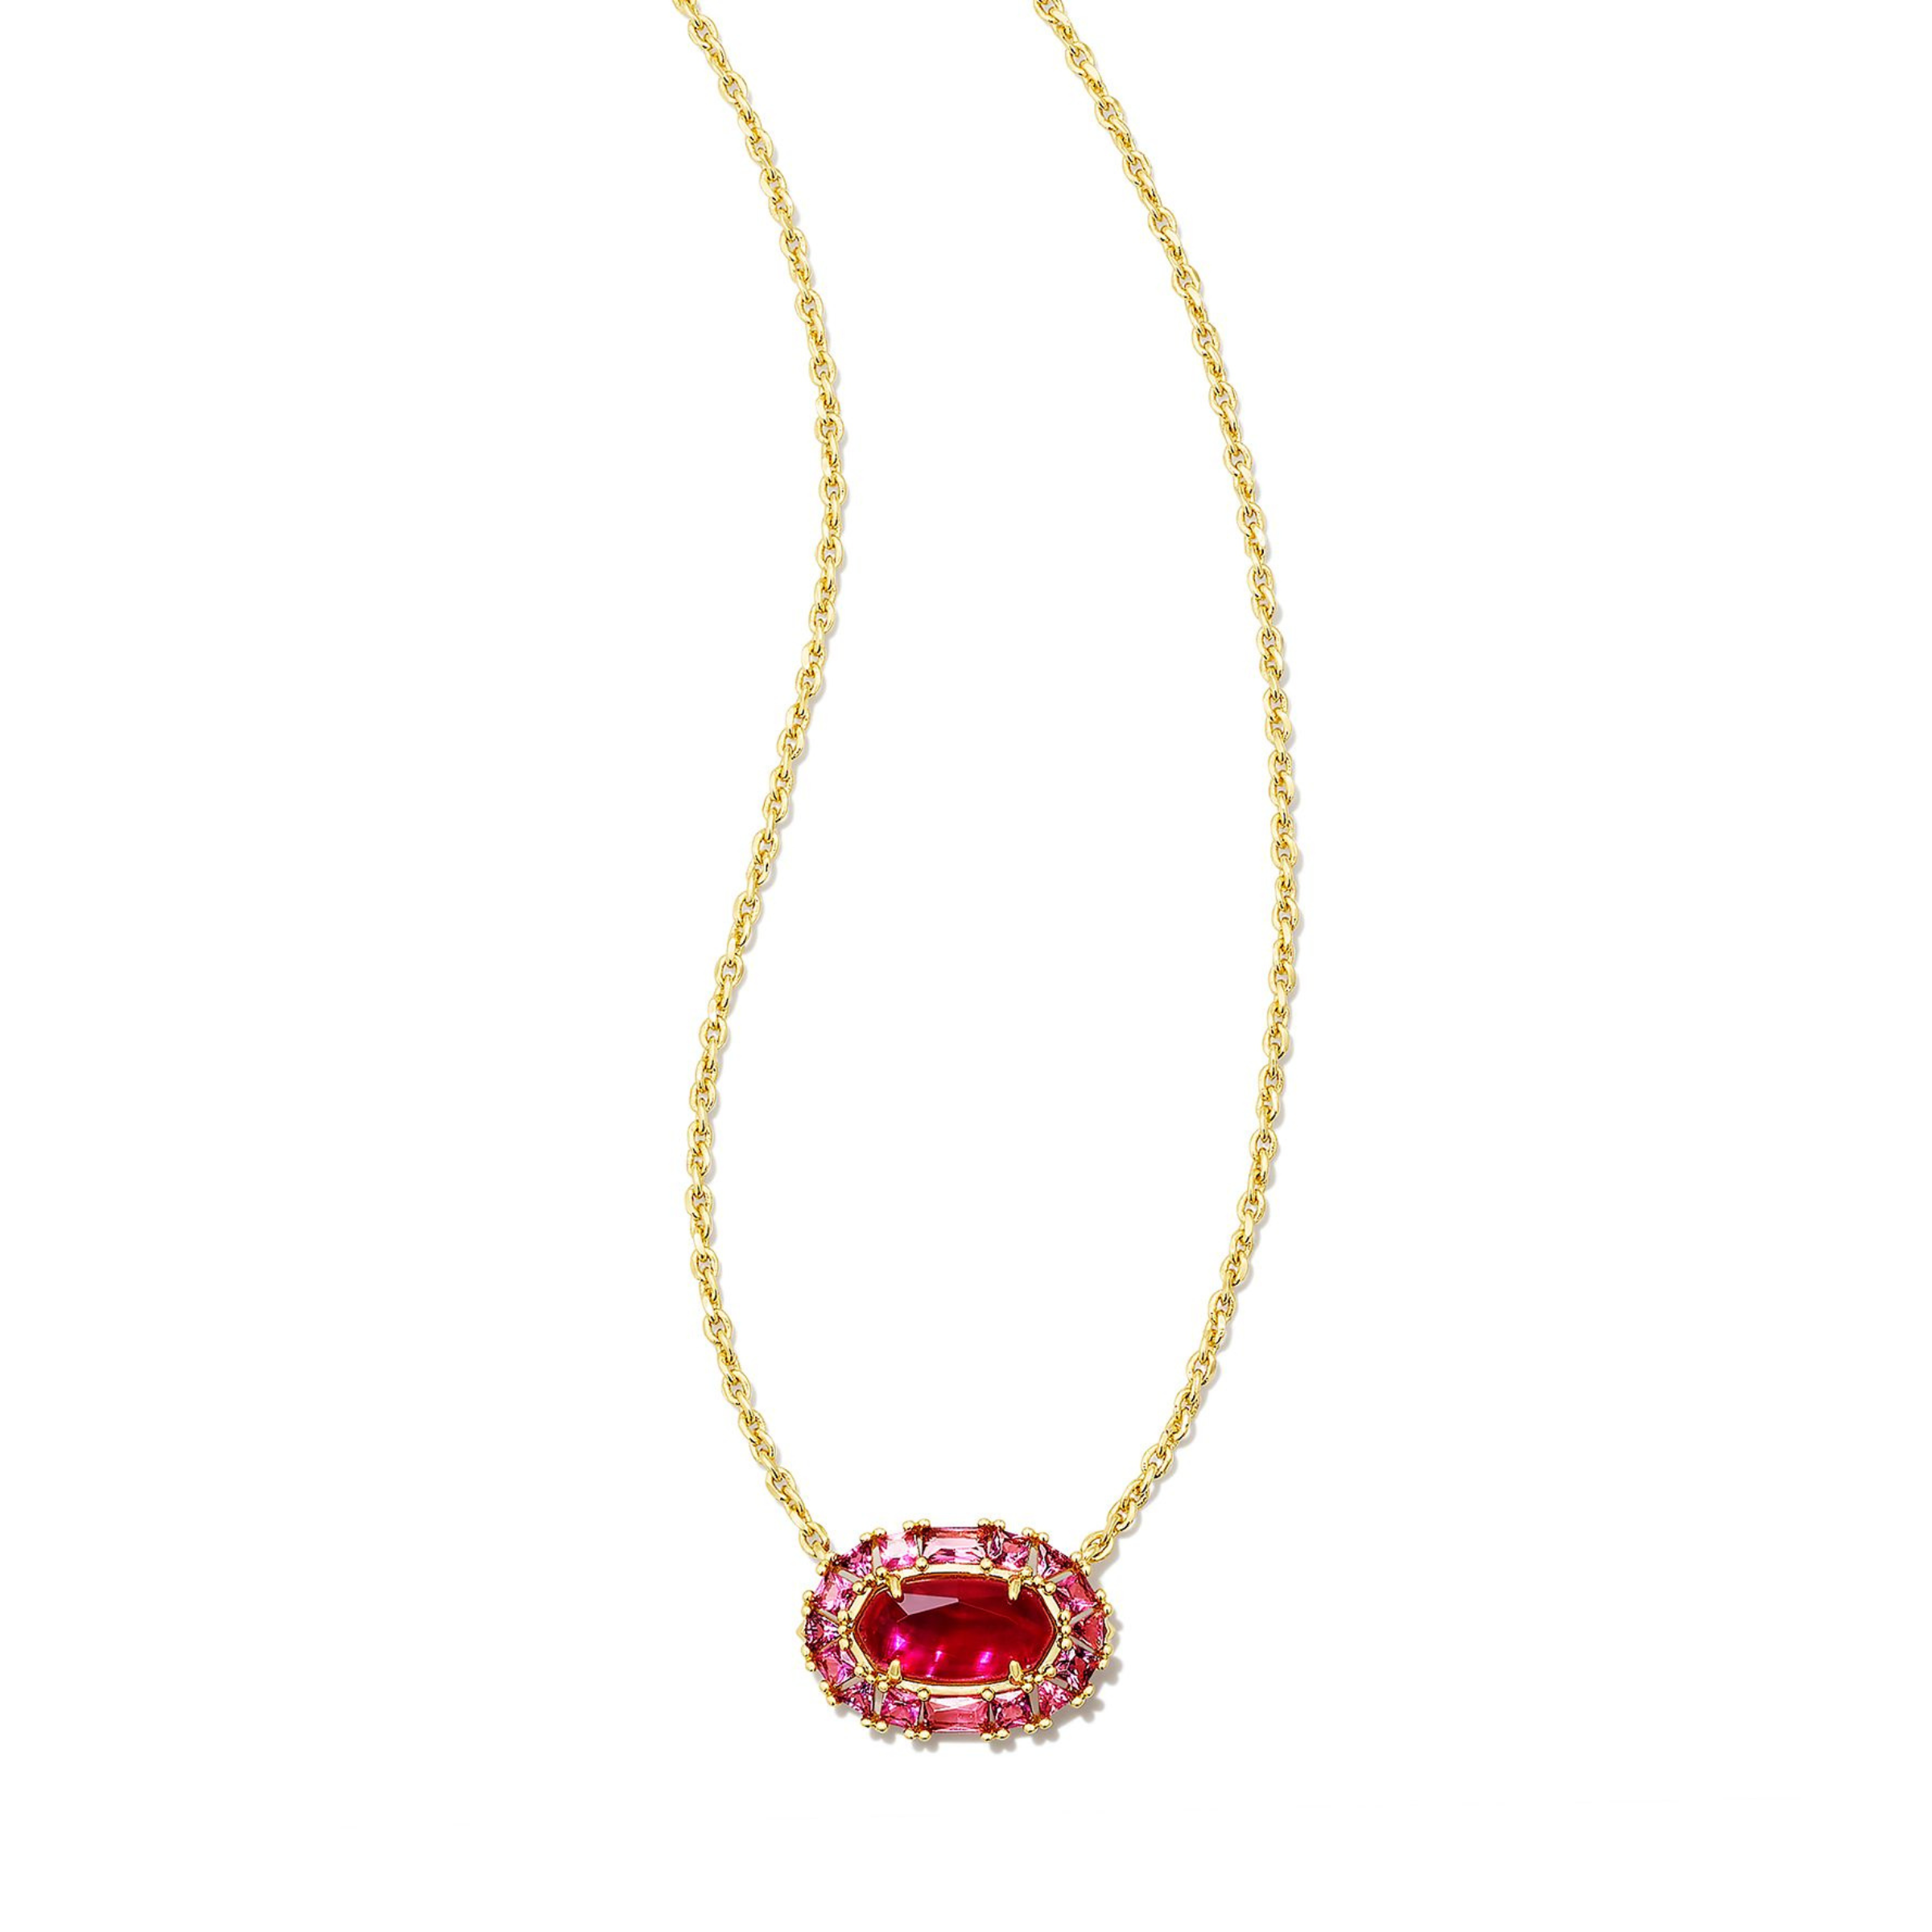 Gold chain necklace with a clear crystal and raspberry illusion oval pendant pictured on a white background. 